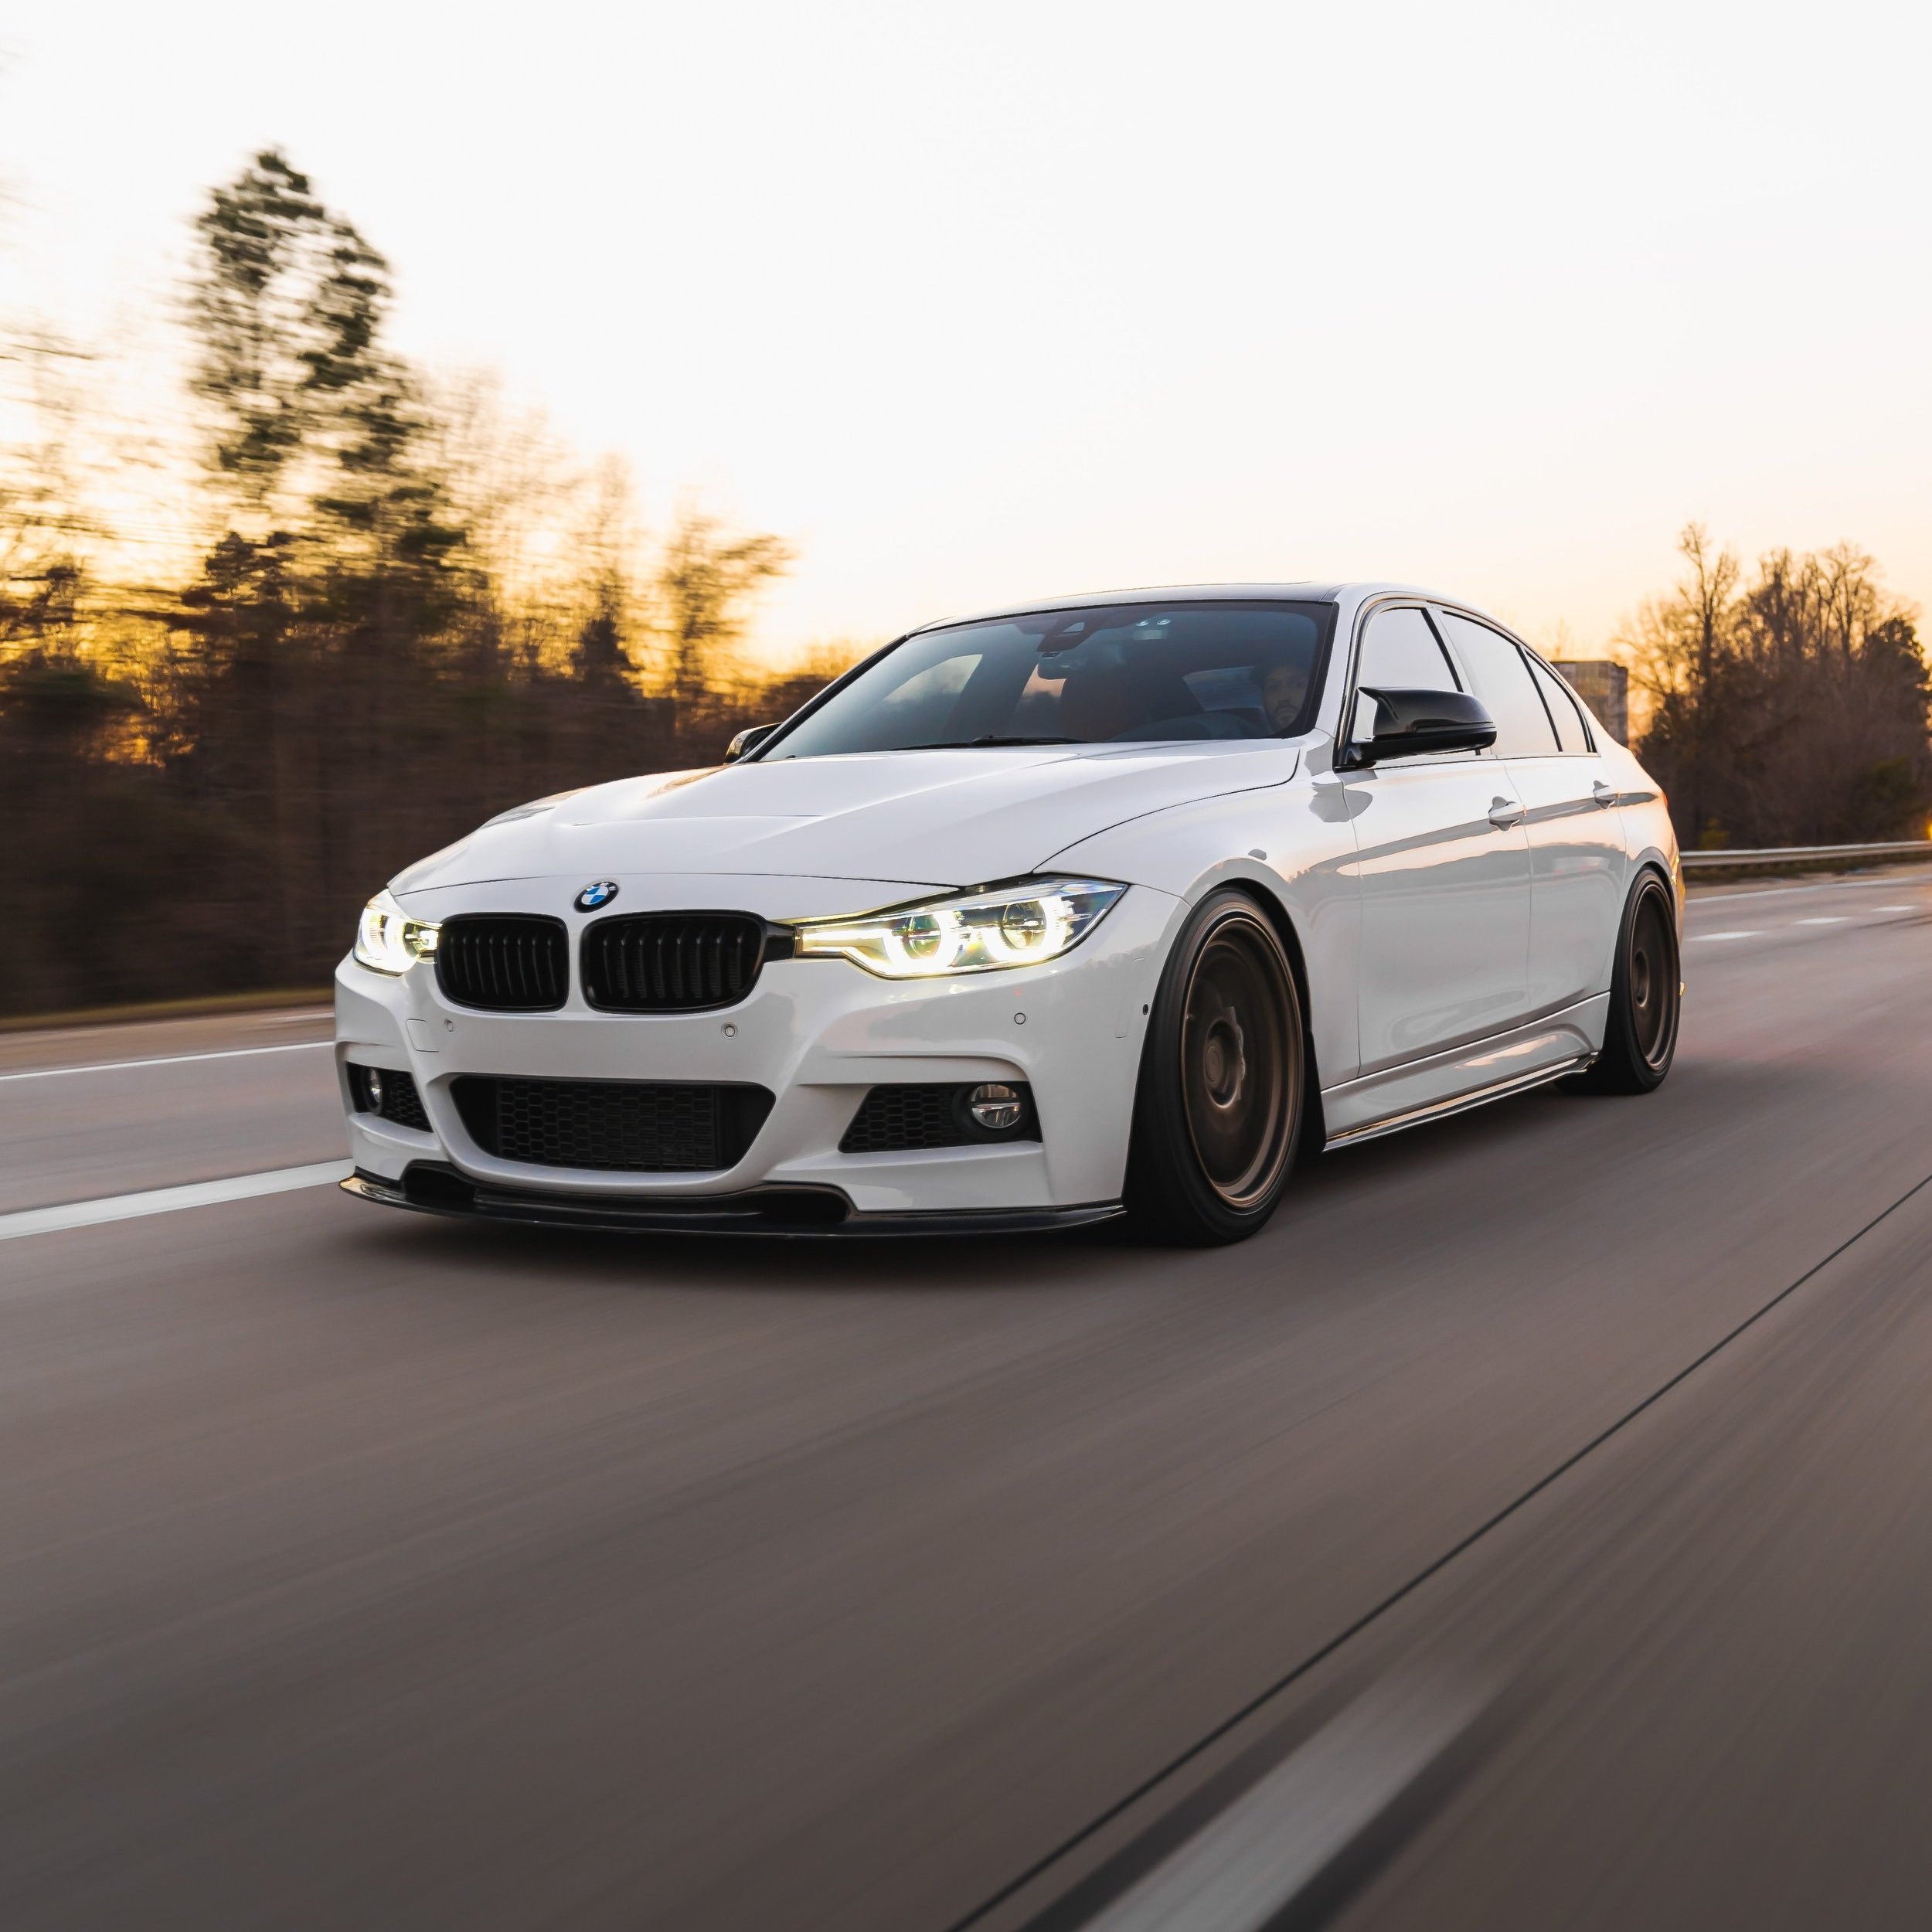 F30 BIMMERCODE: SPORT DISPLAYS — ThicWhips